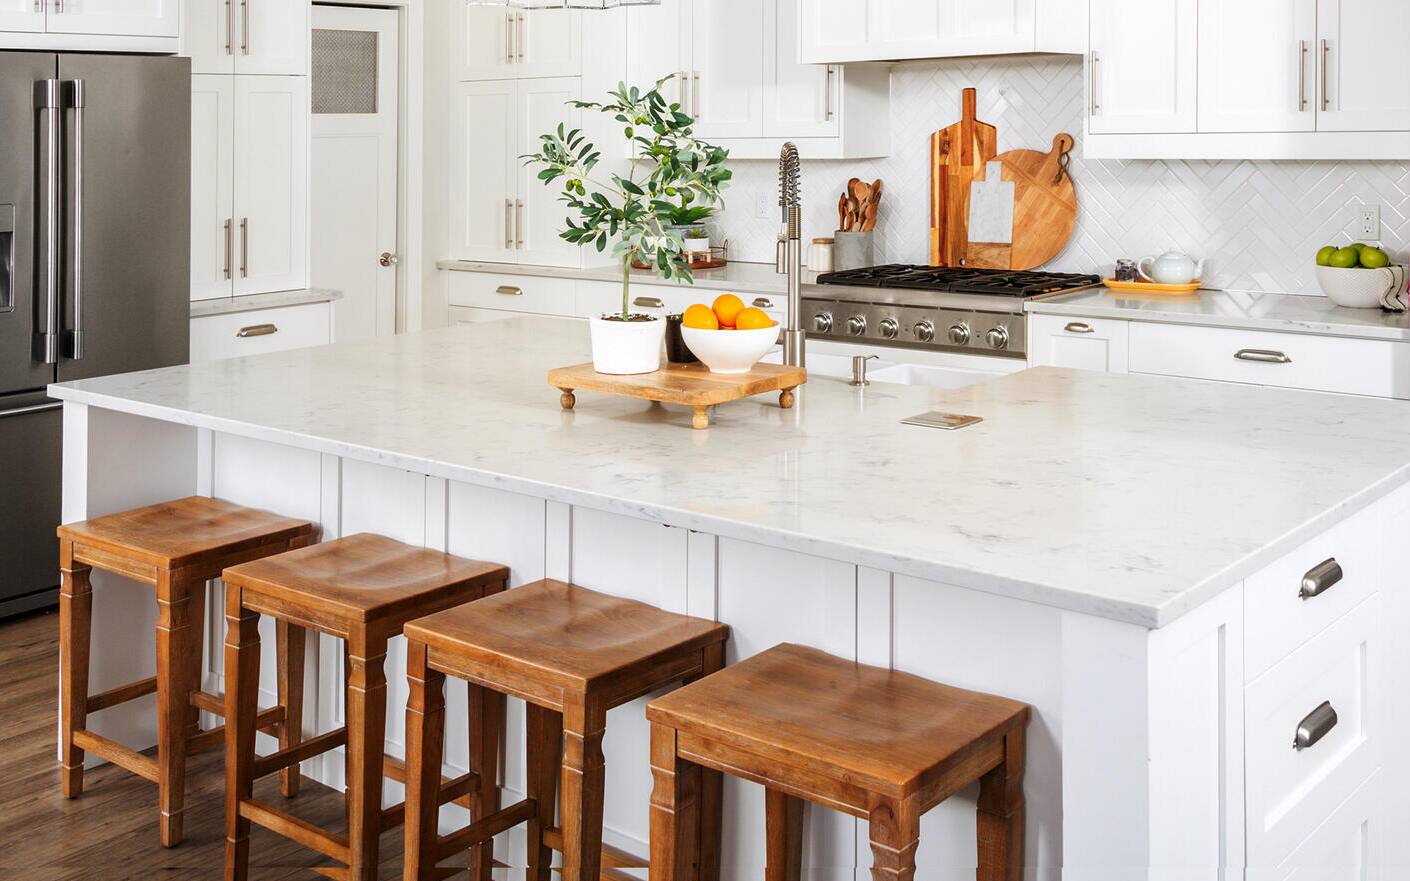 CONSULT WITH A COUNTERTOP SPECIALIST